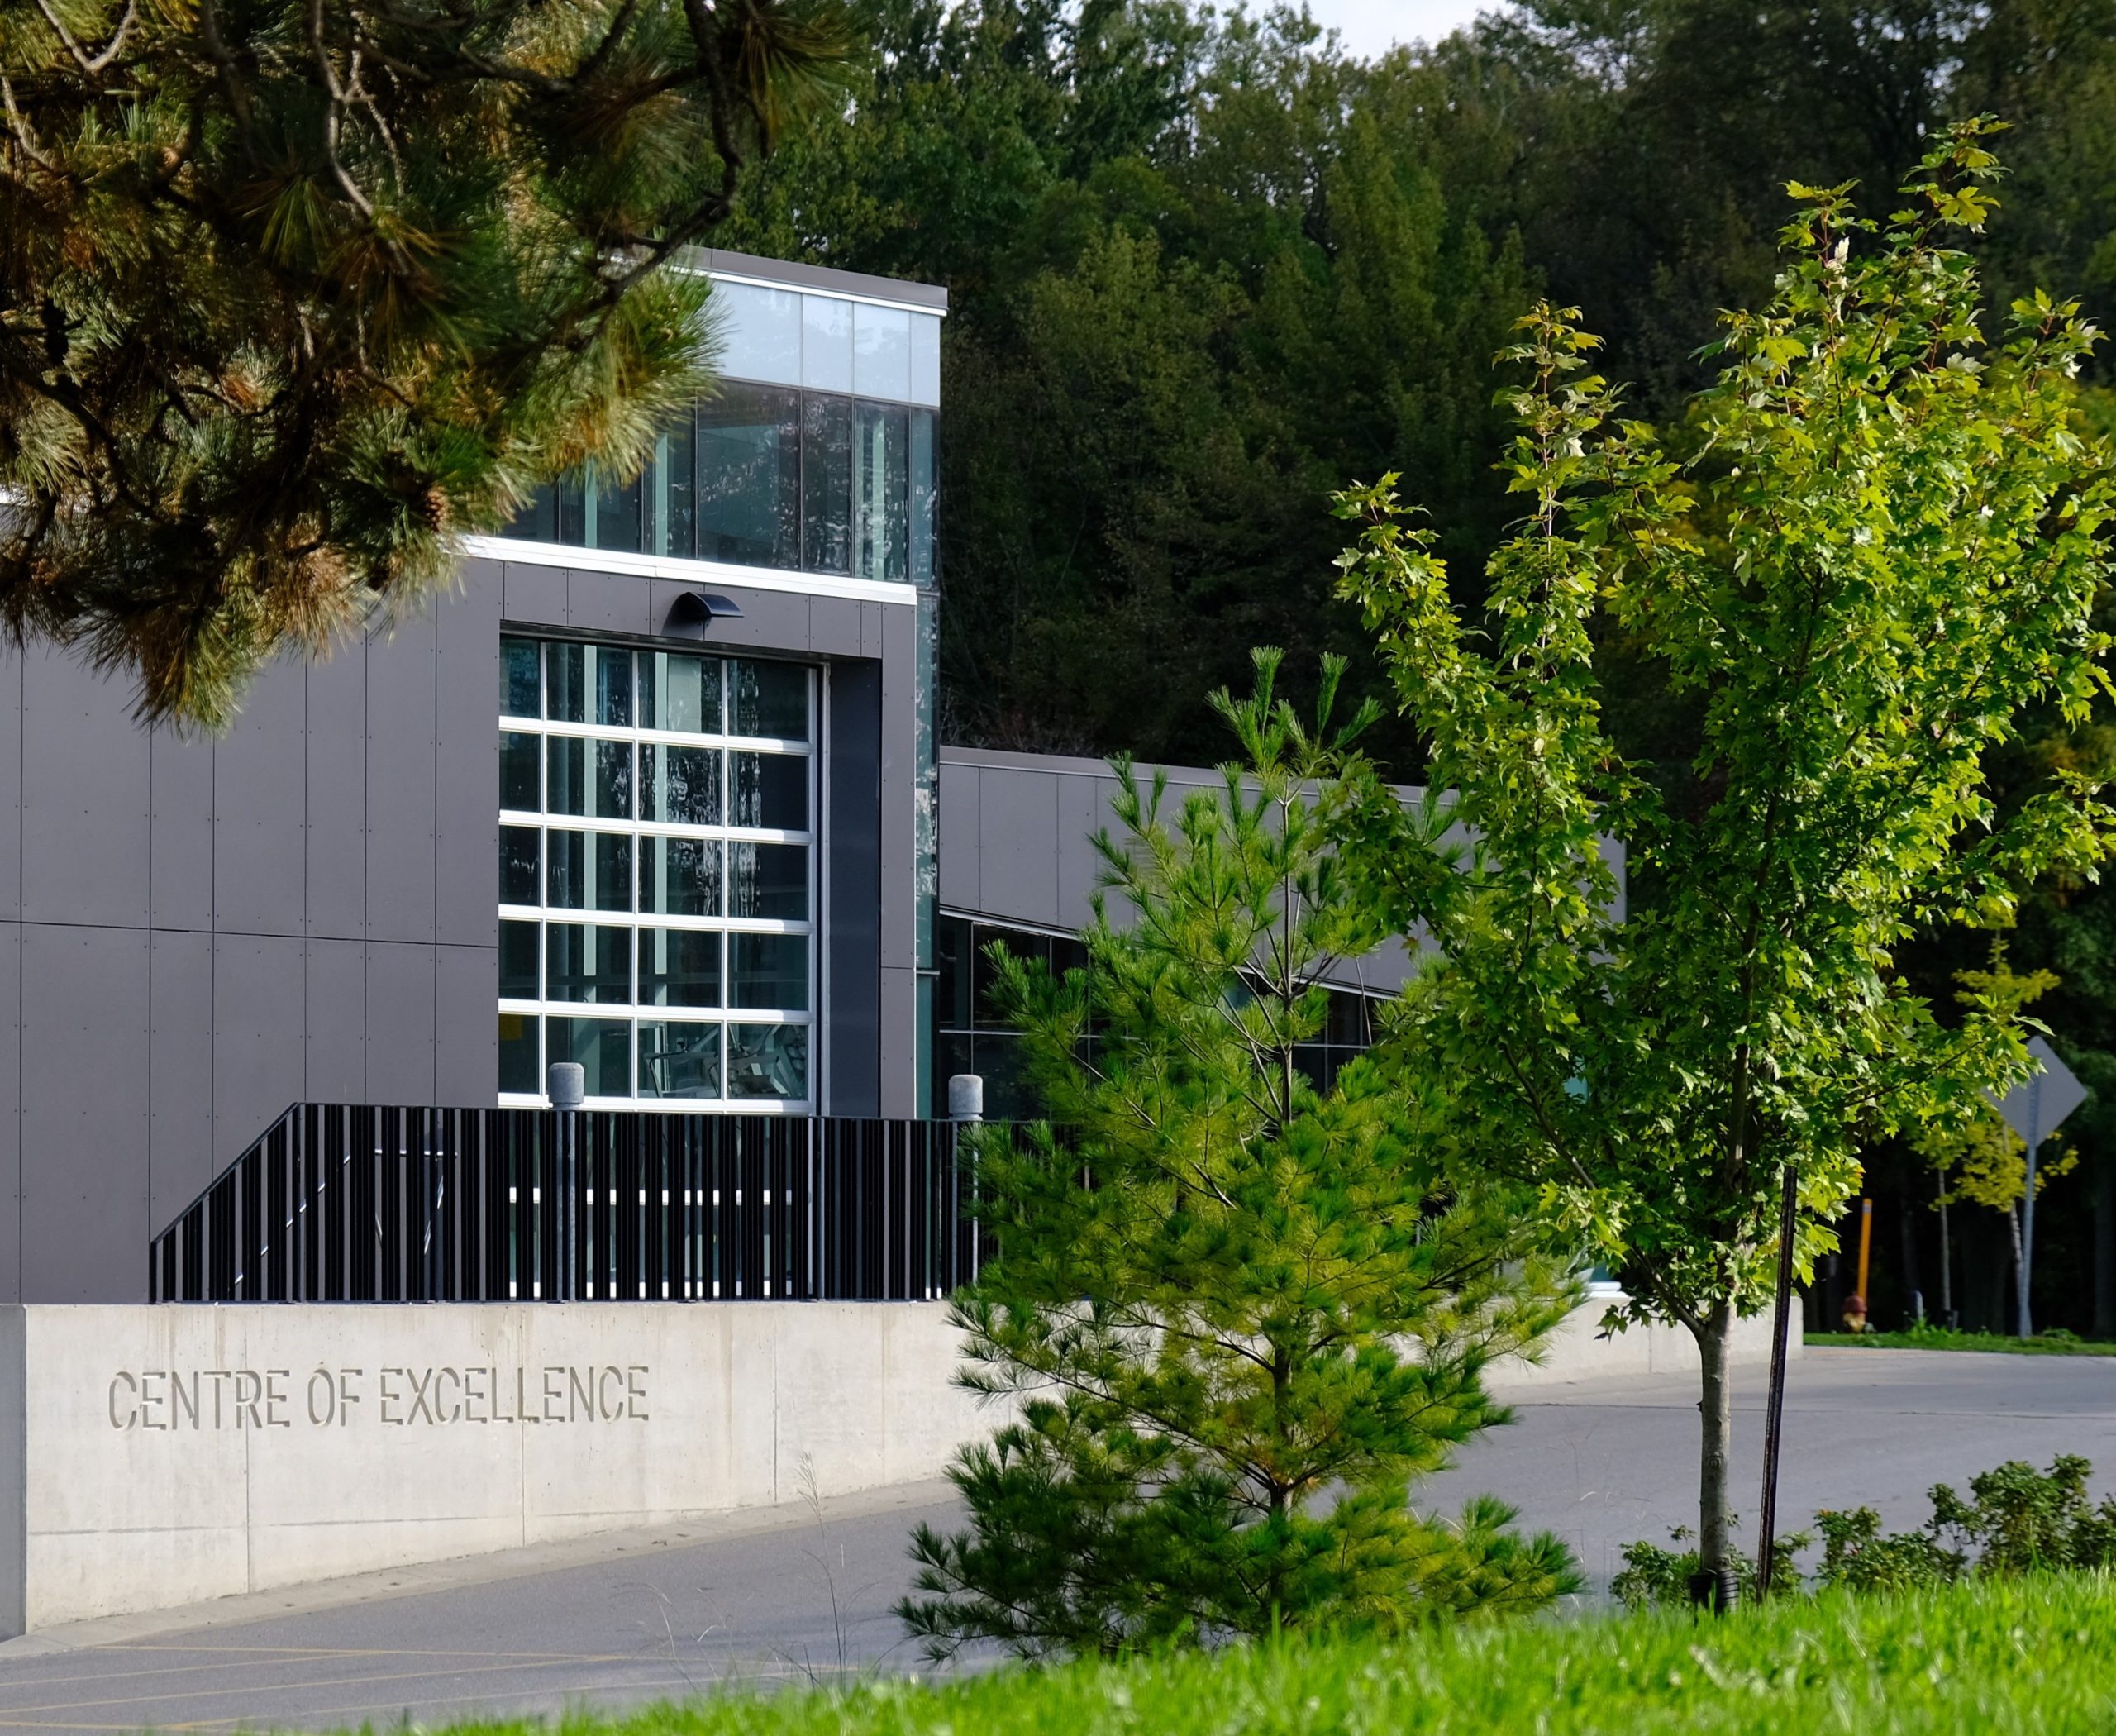 Photo of Lambton Centre of Excellence from the outside